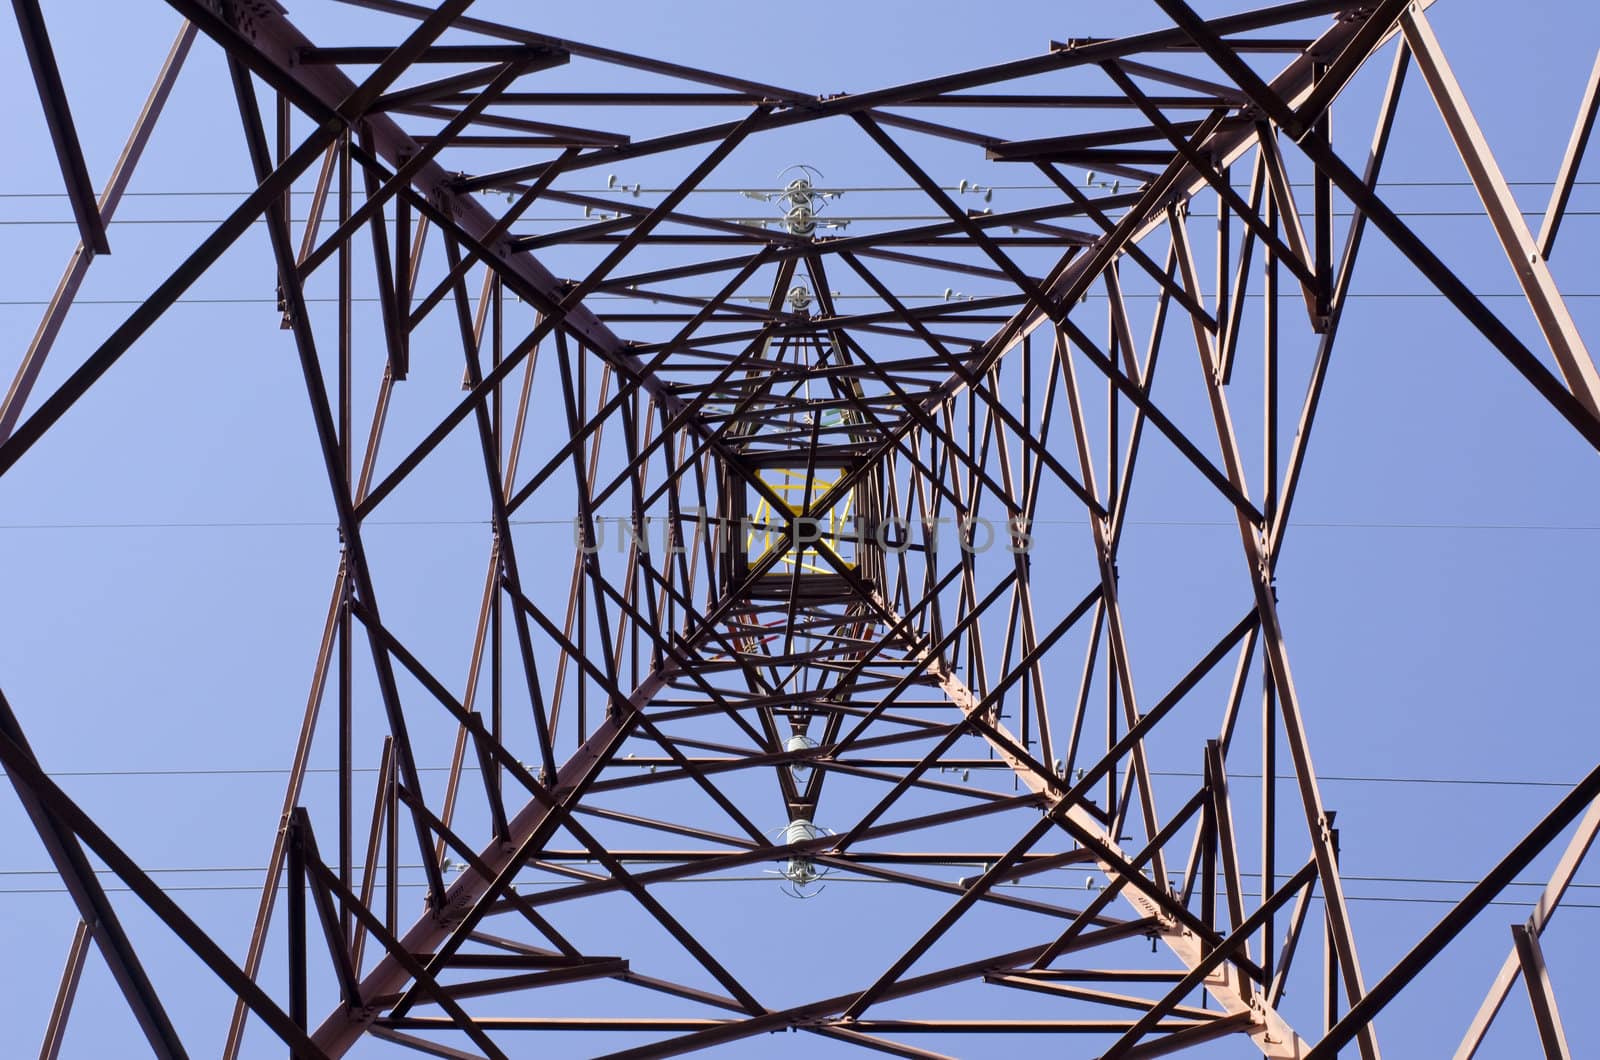 Transmission tower as seen from below towards a blue sky